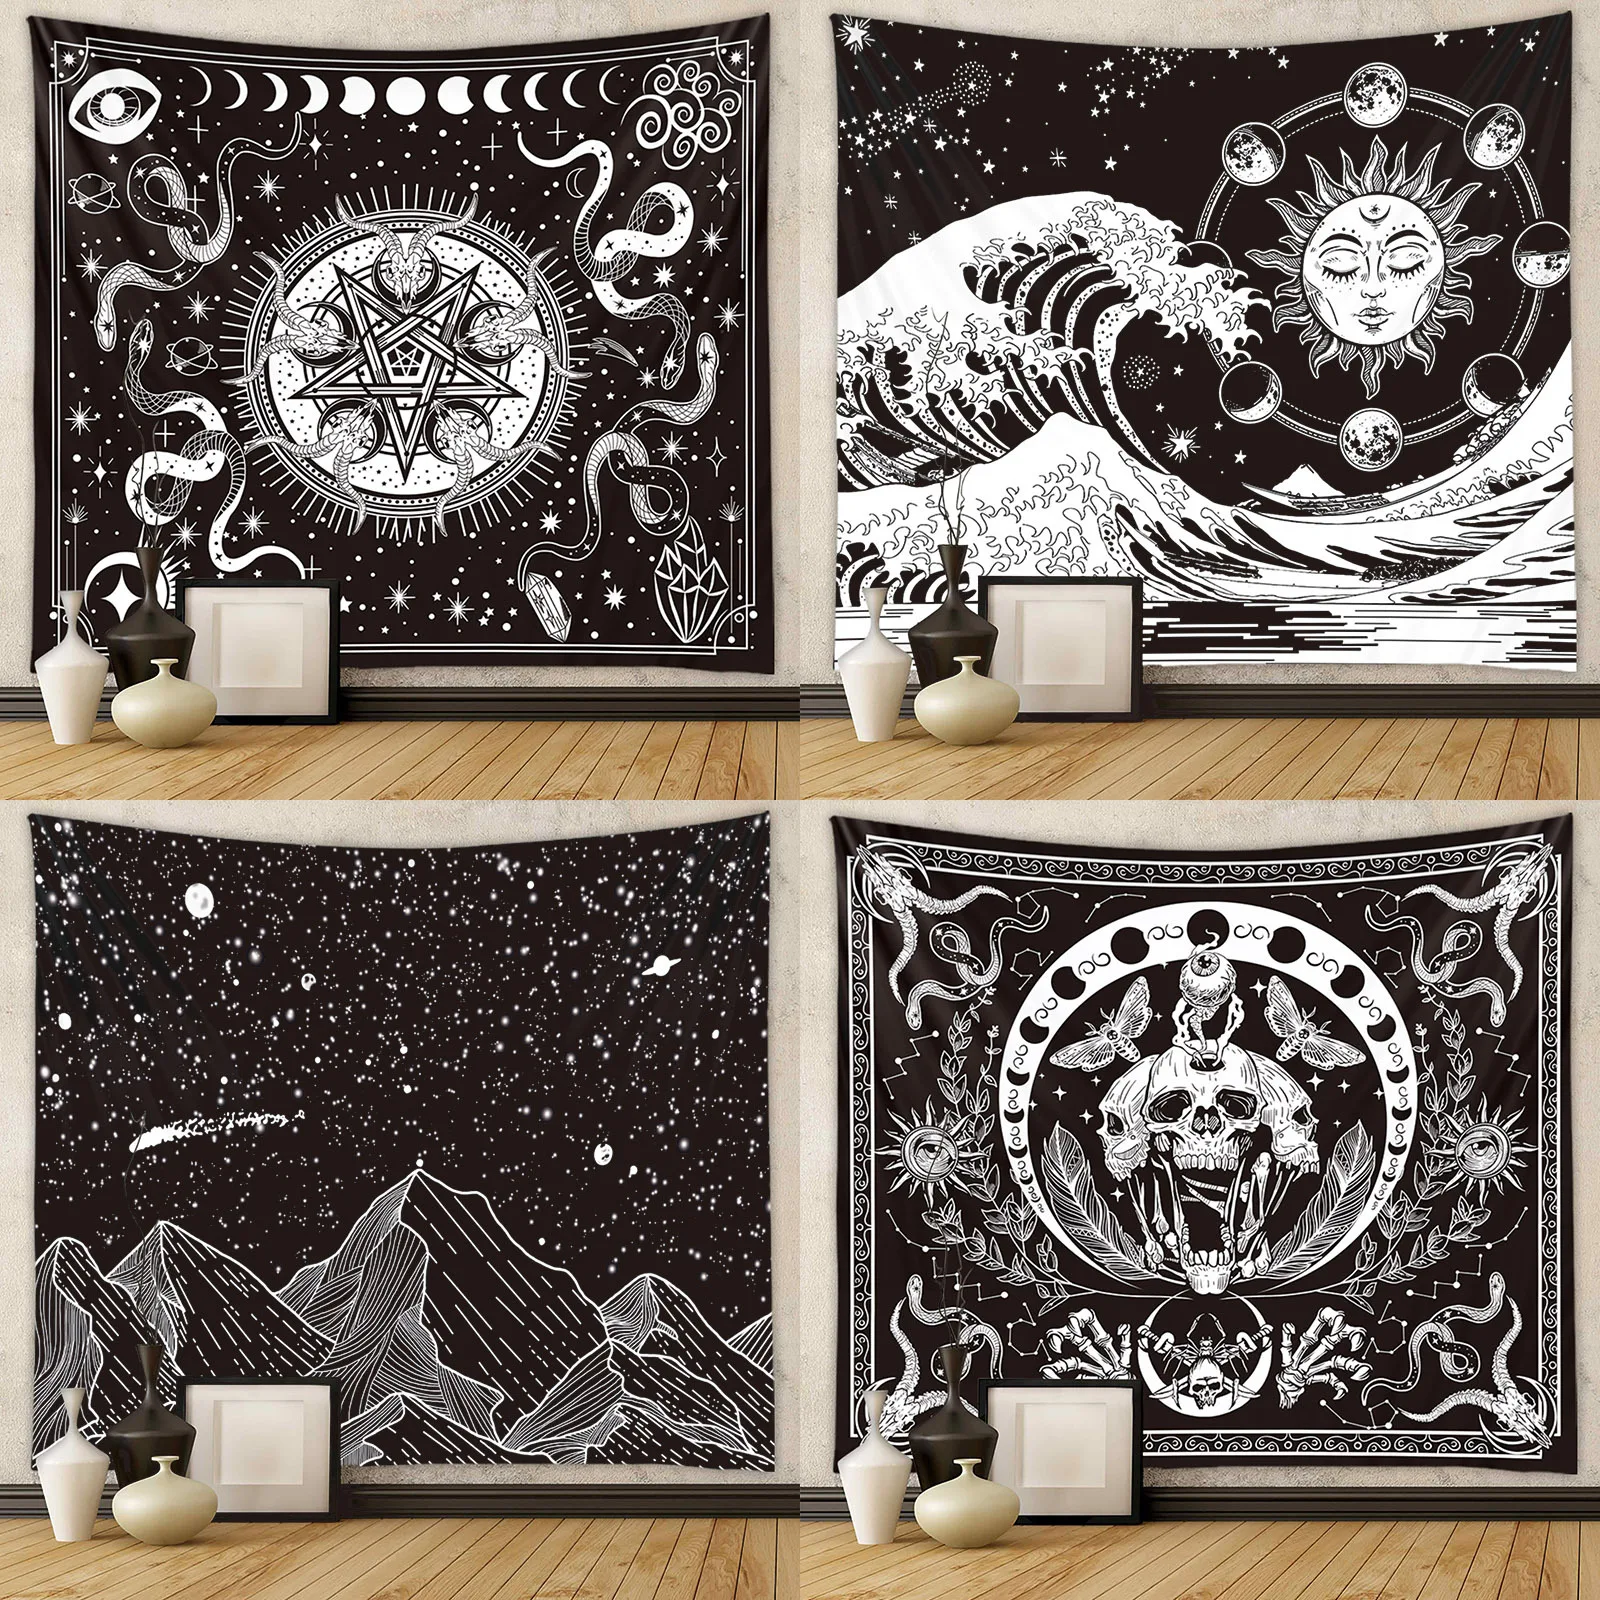 

Witchcraft Tarot Wall Tapestry Sun Moon Face Wall Hanging Sofa Room Aesthetic Bedroom Decoration Home Decor Tapestry 150x200 cm